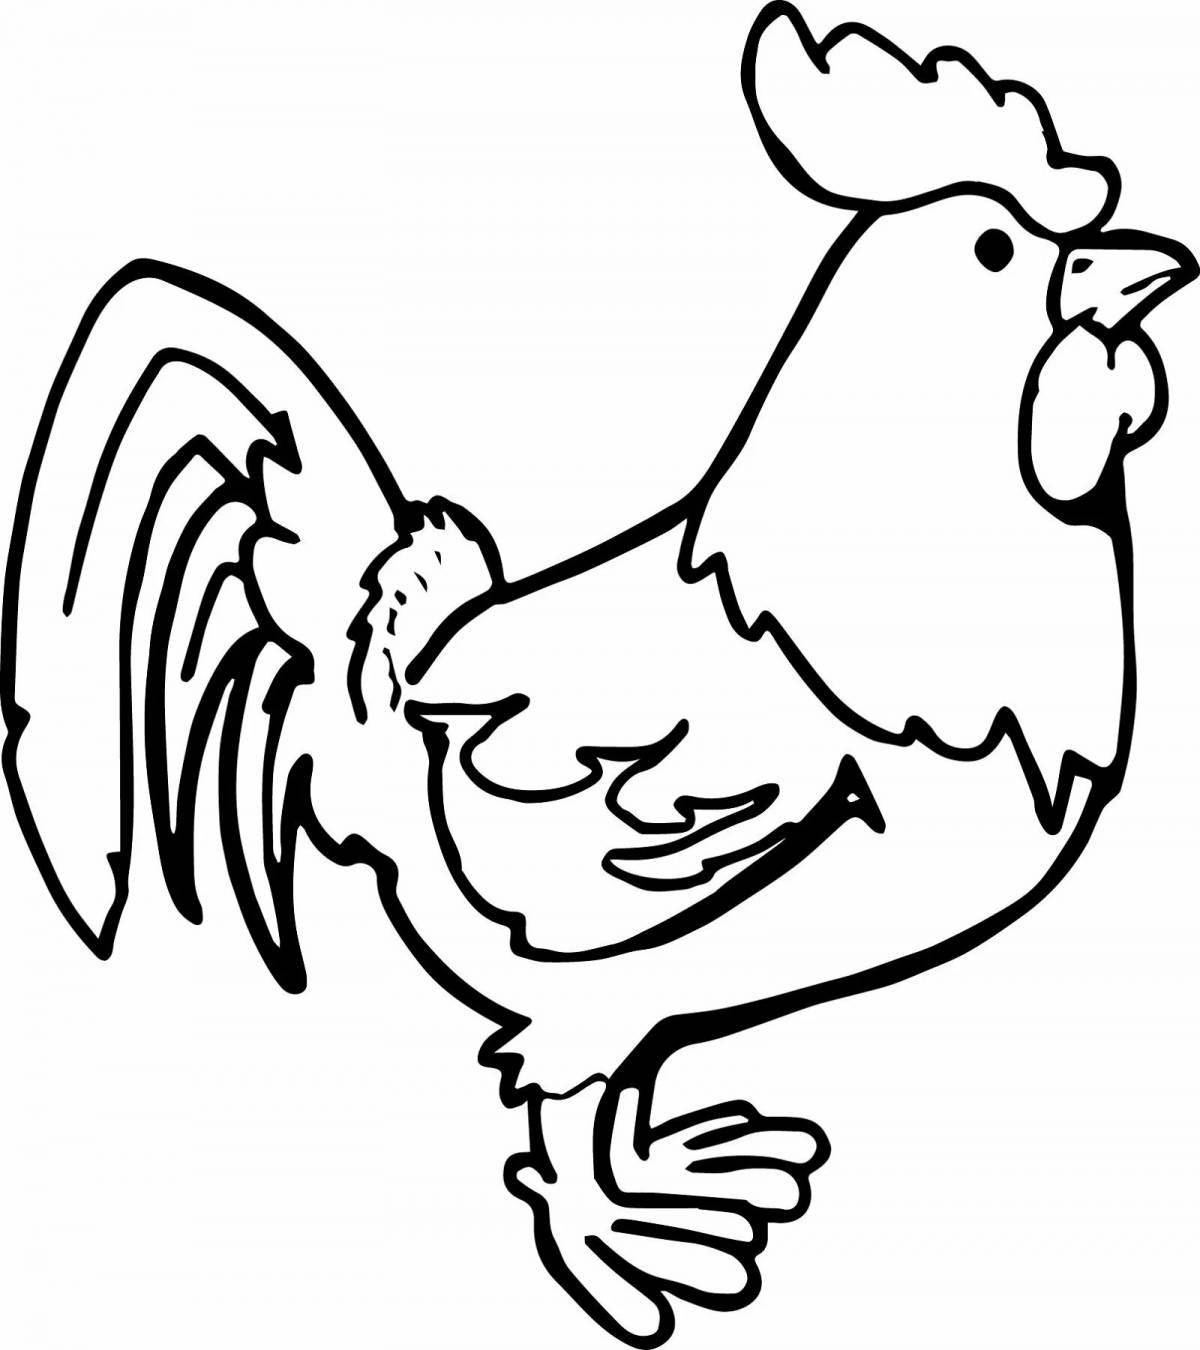 Cute chicken drawing for kids